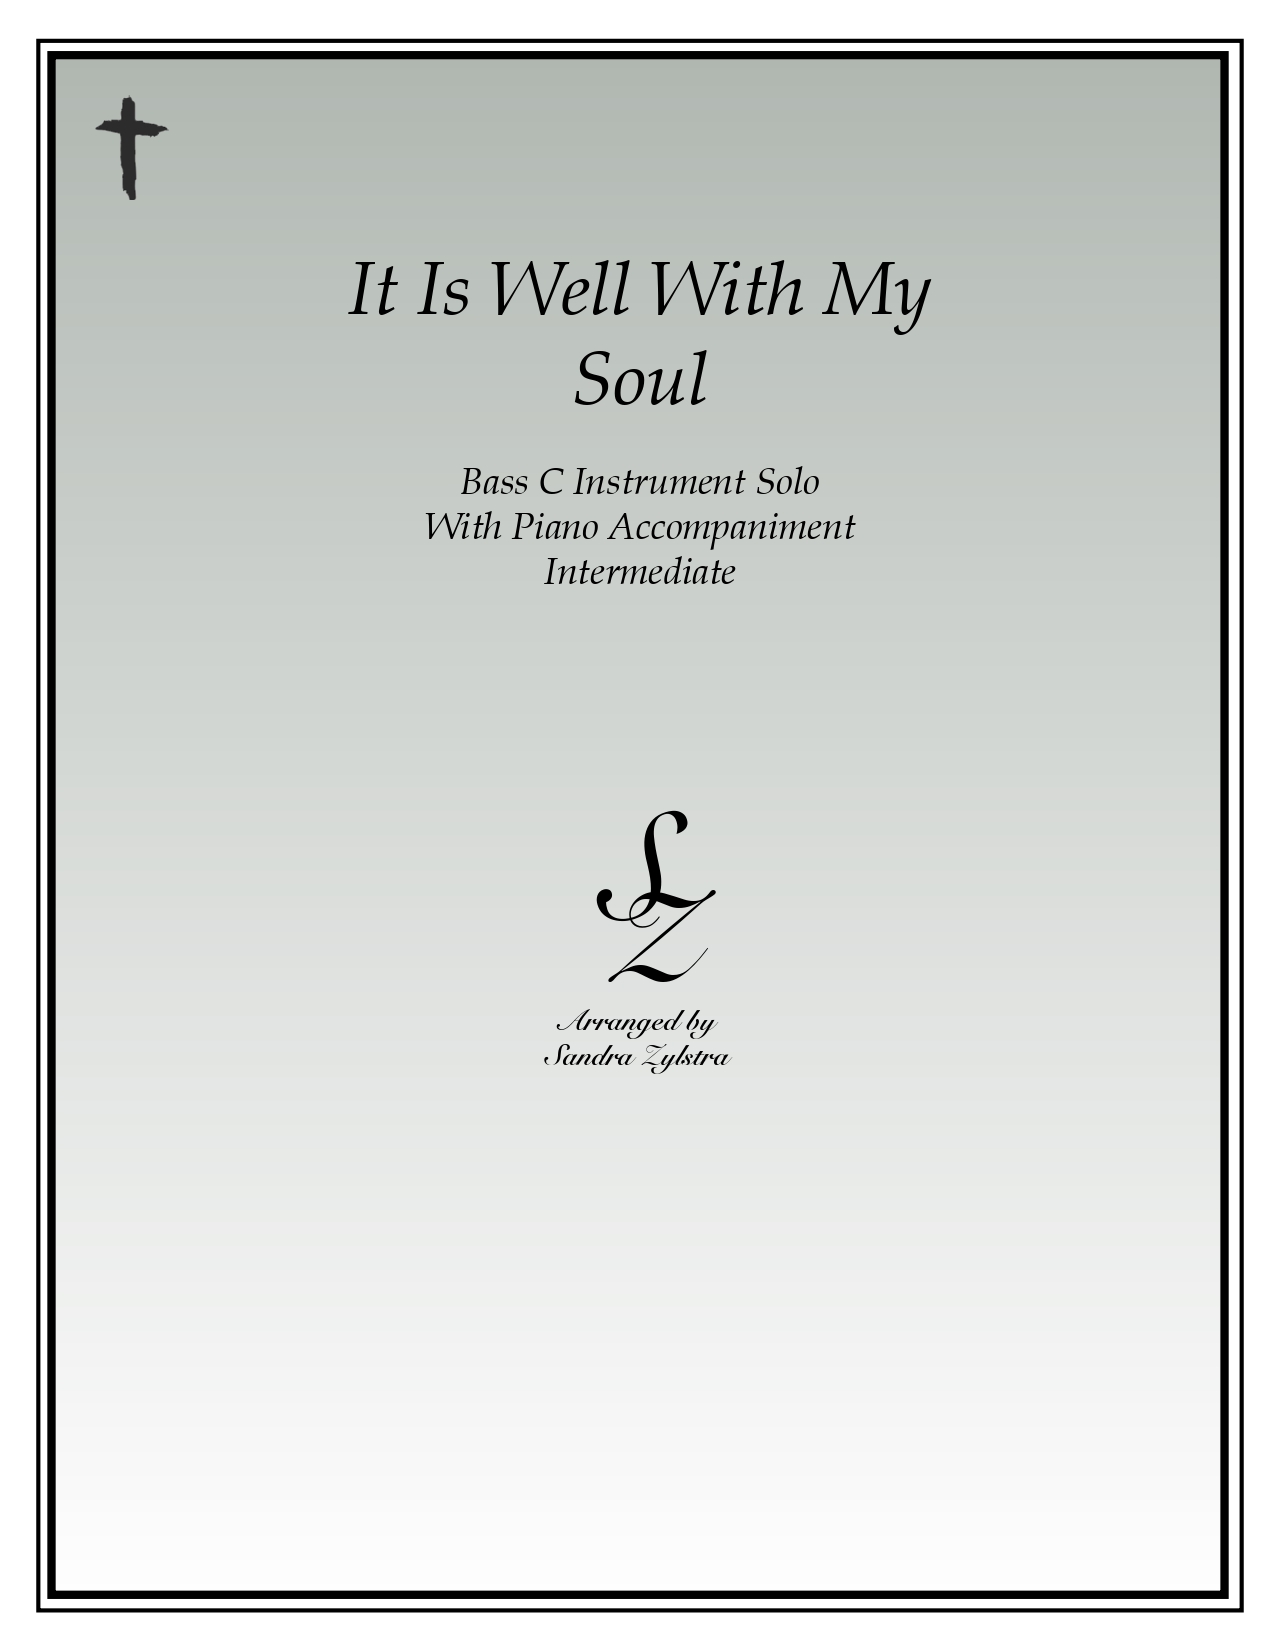 It Is Well With My Soul bass C instrument solo part cover page 00011